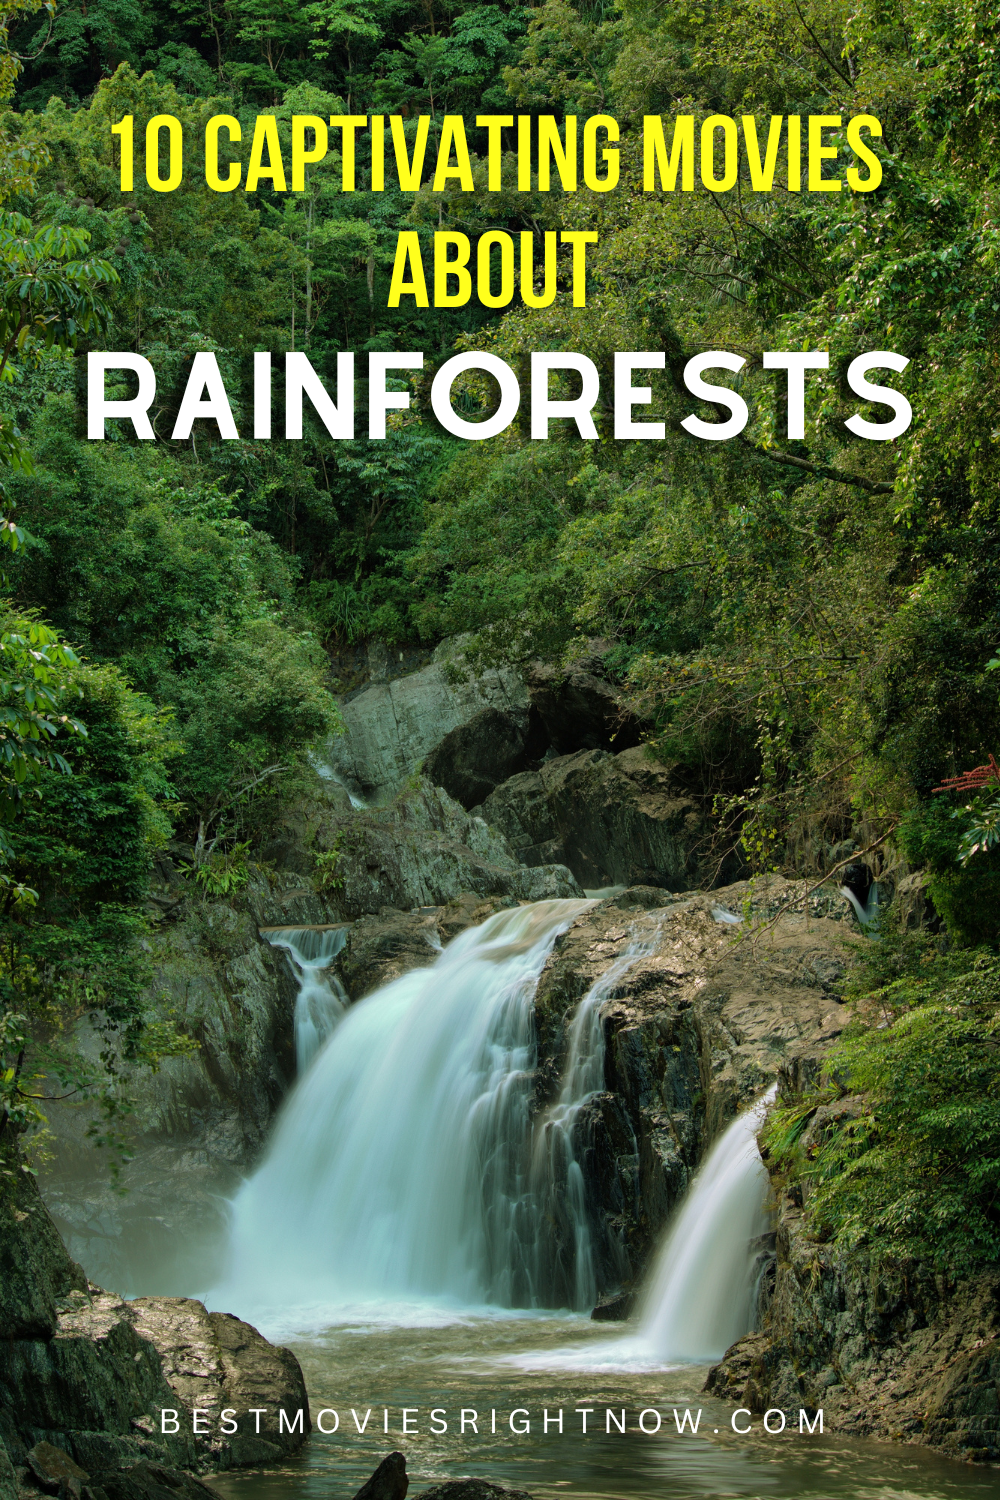 a picture of a falls in rainforest with caption 